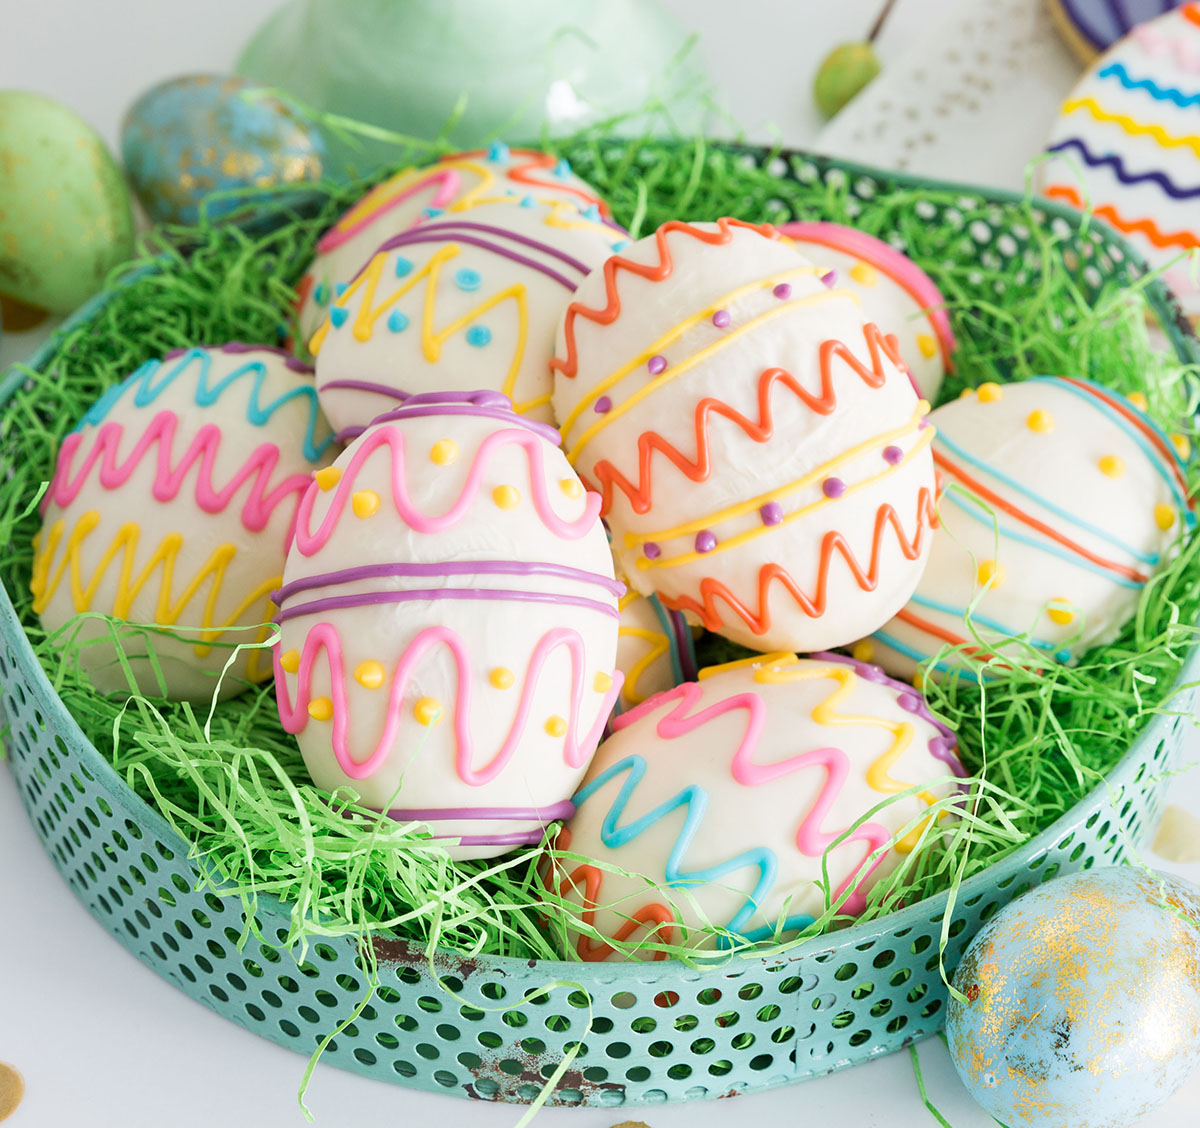 Food and Fun for a Quarantined Easter Celebration | The Buzz Magazines